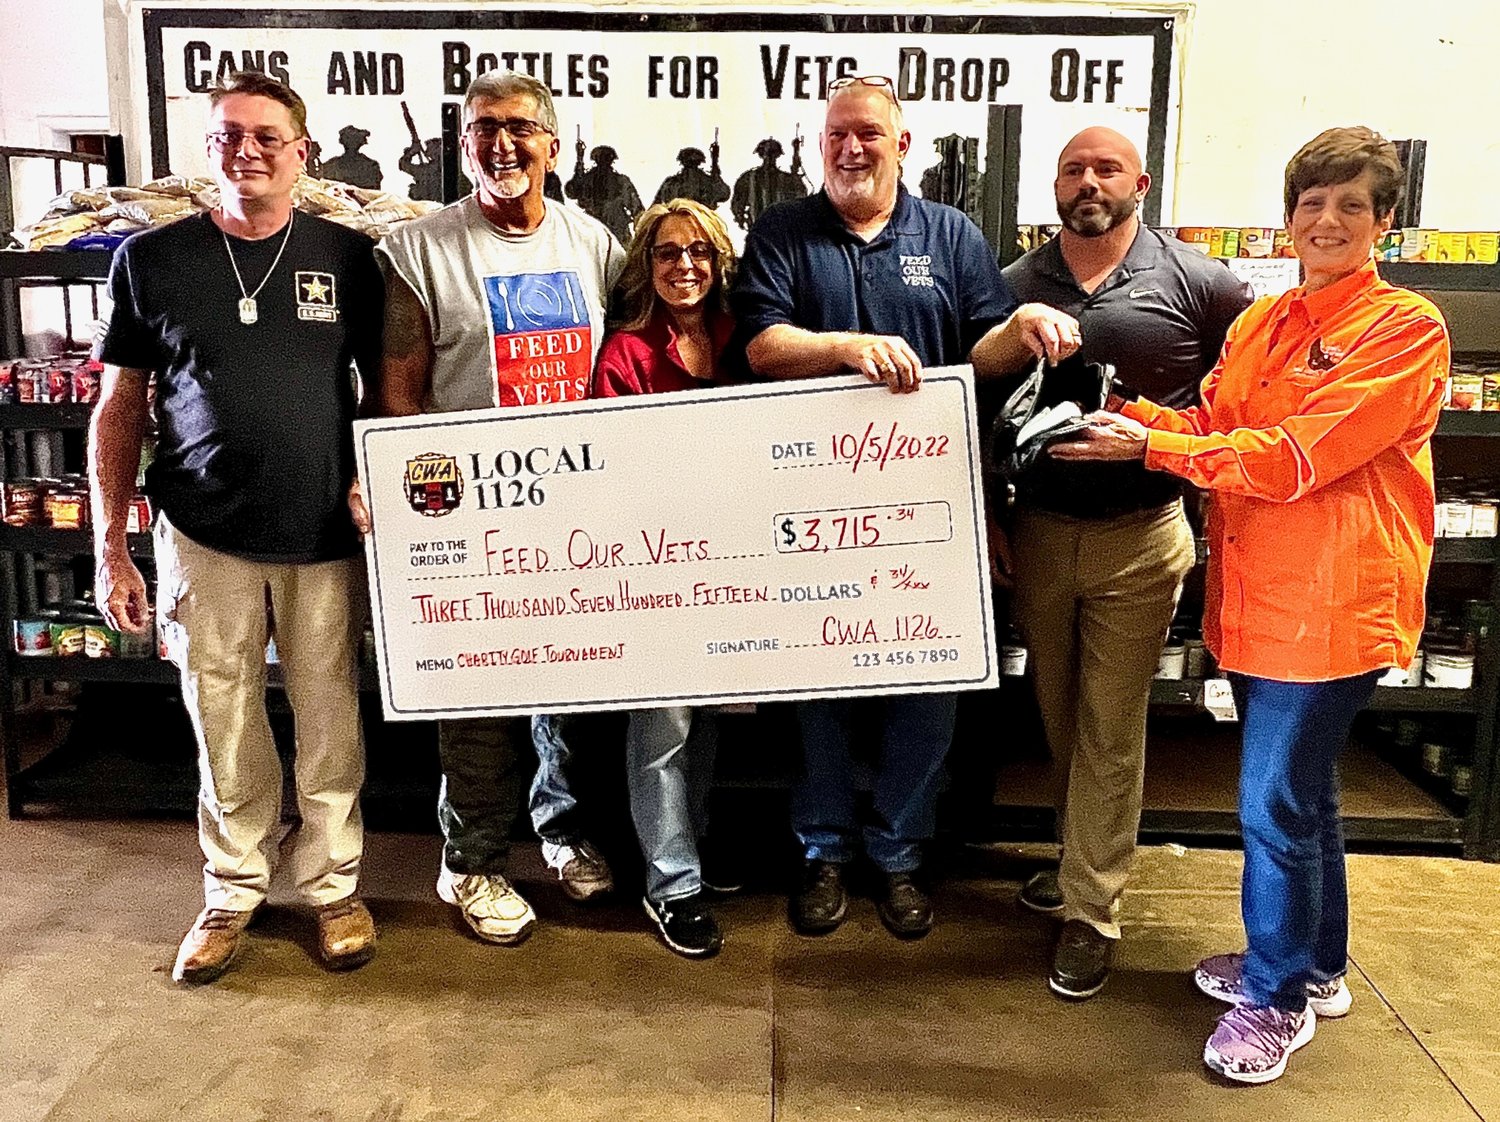 Organizers of the annual 2022 Communications Workers of America Local 1126/Leatherstocking Club Charity Golf Tournament present a check for $3,715 to the Feed Our Vets program. From left: Carl Davis, Joe Ancona, Christina Cirasuolo-Trzepacz, Rich Synek, Jeff Kinne, and Jacqueline Schmidt.